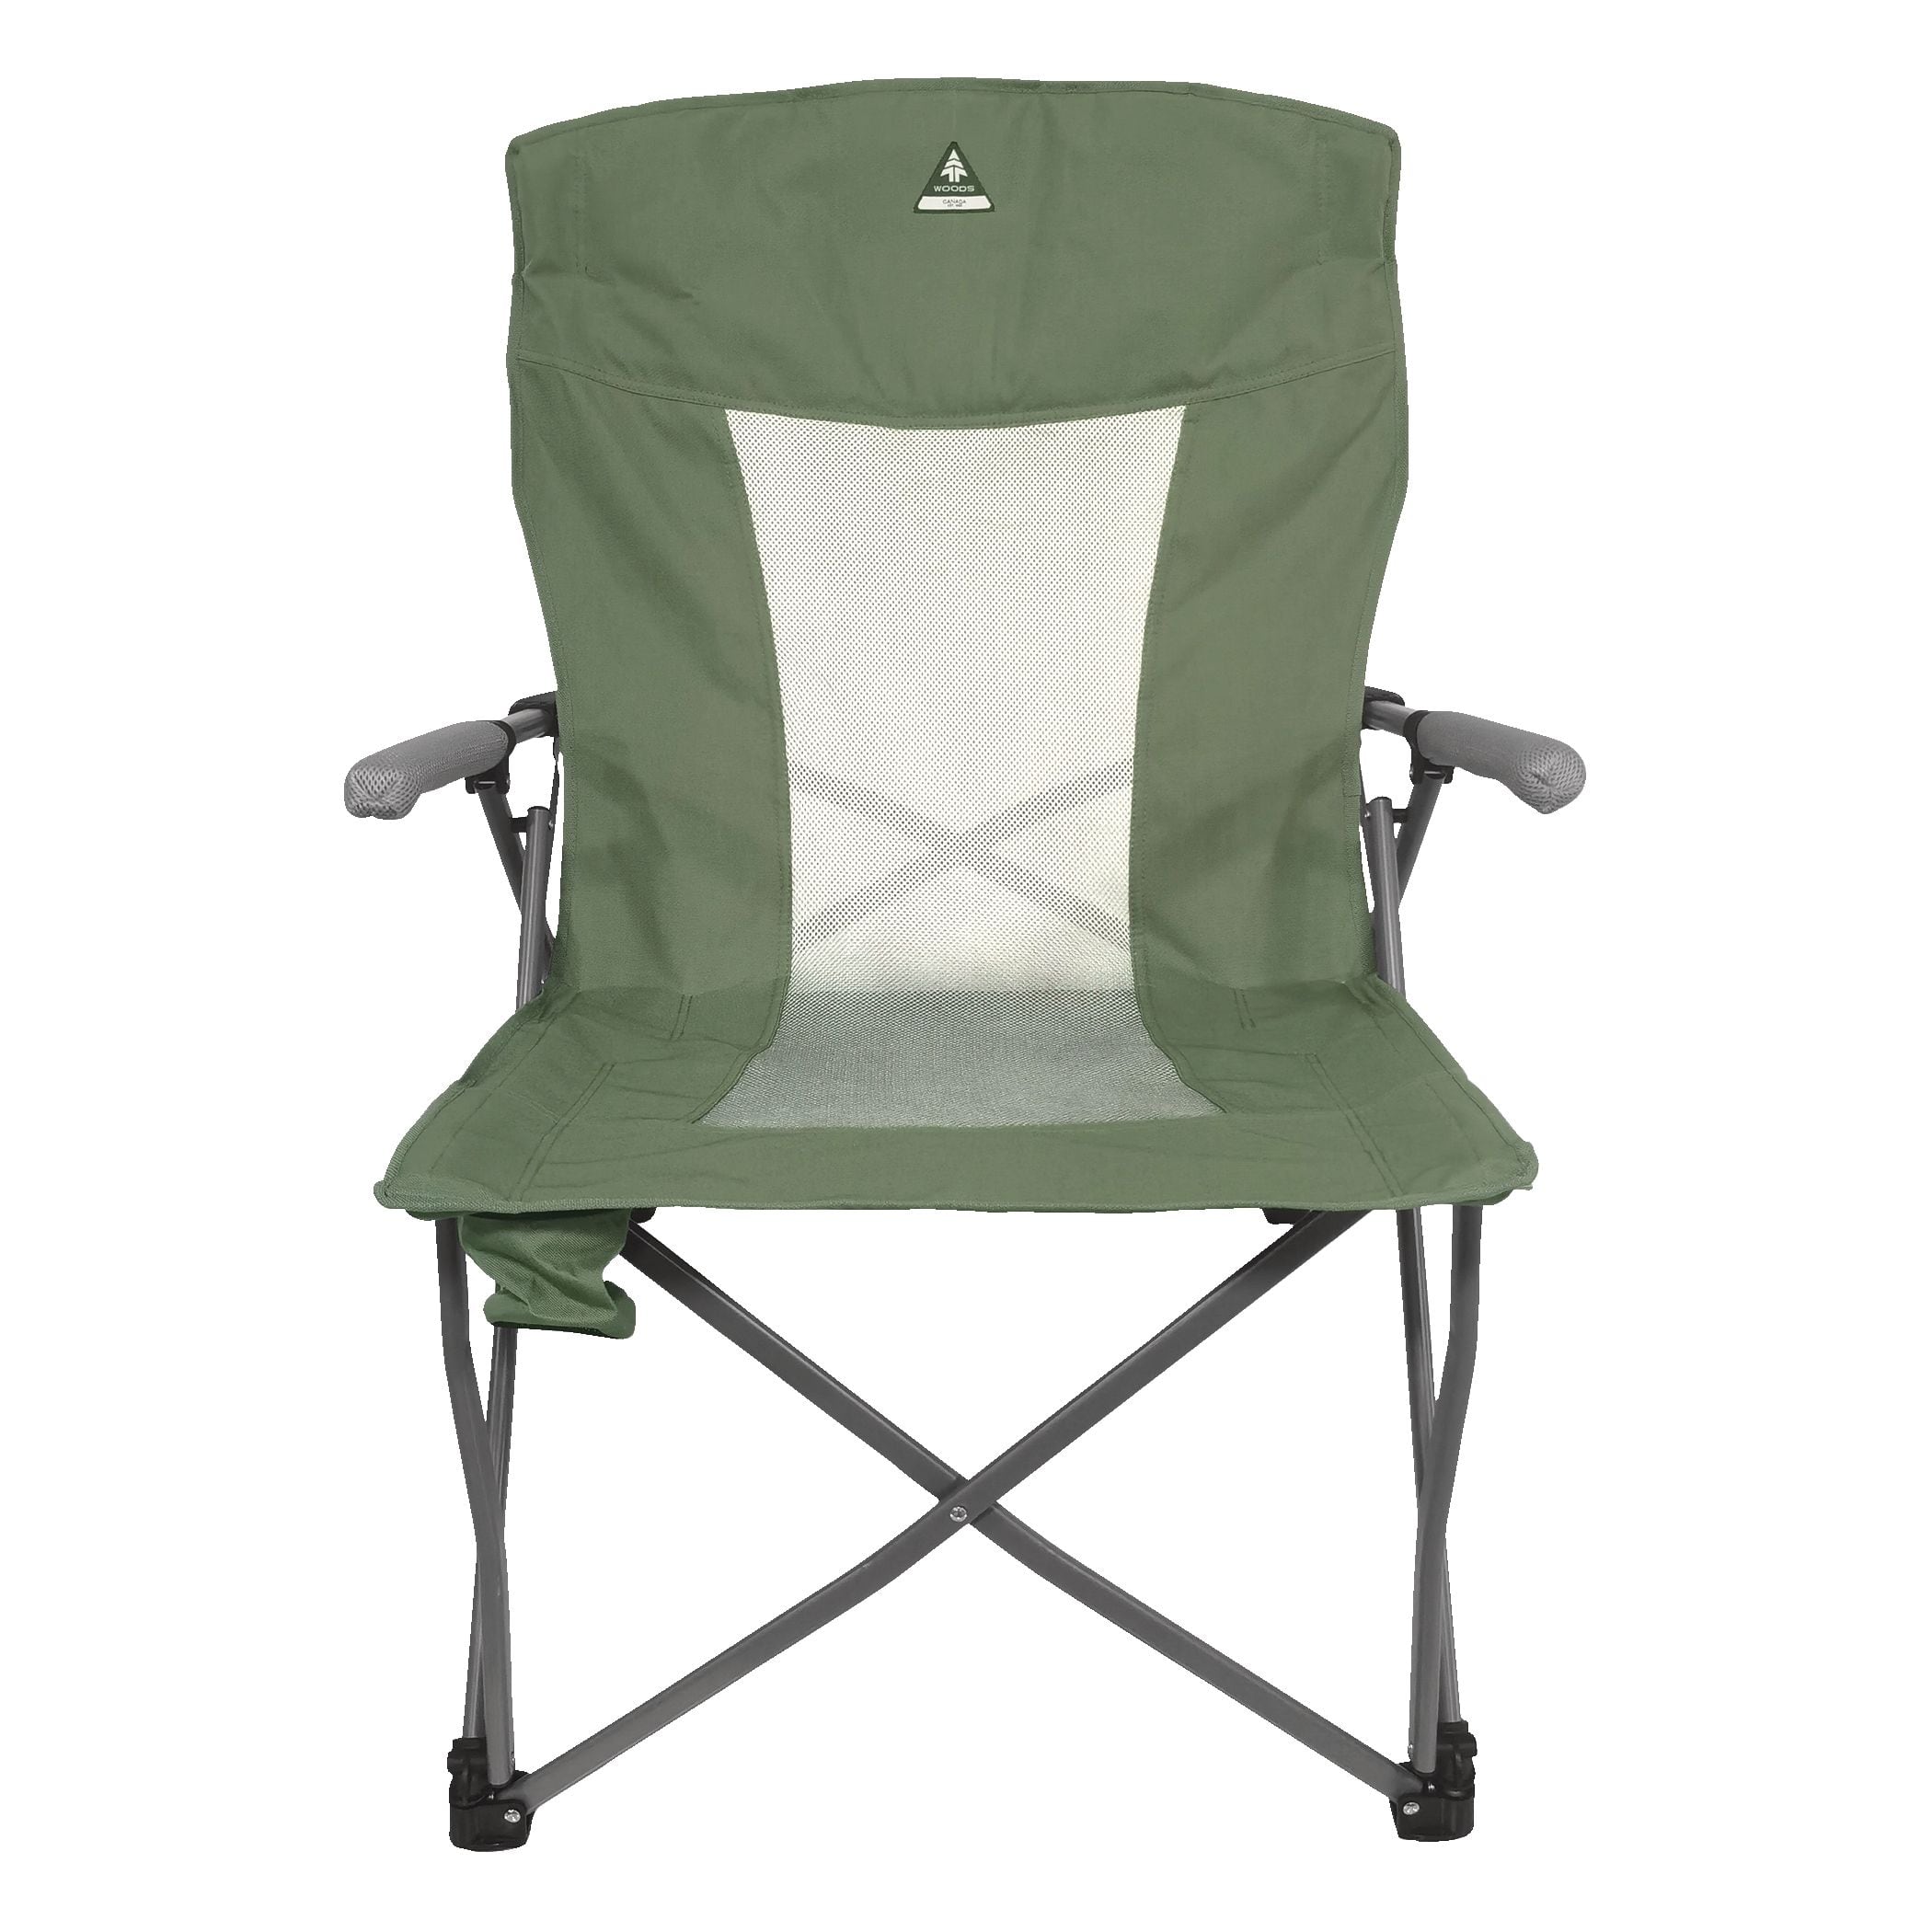 Woods™ Oversized Hard Arm Camping Chair with Cup Holder Canadian Tire